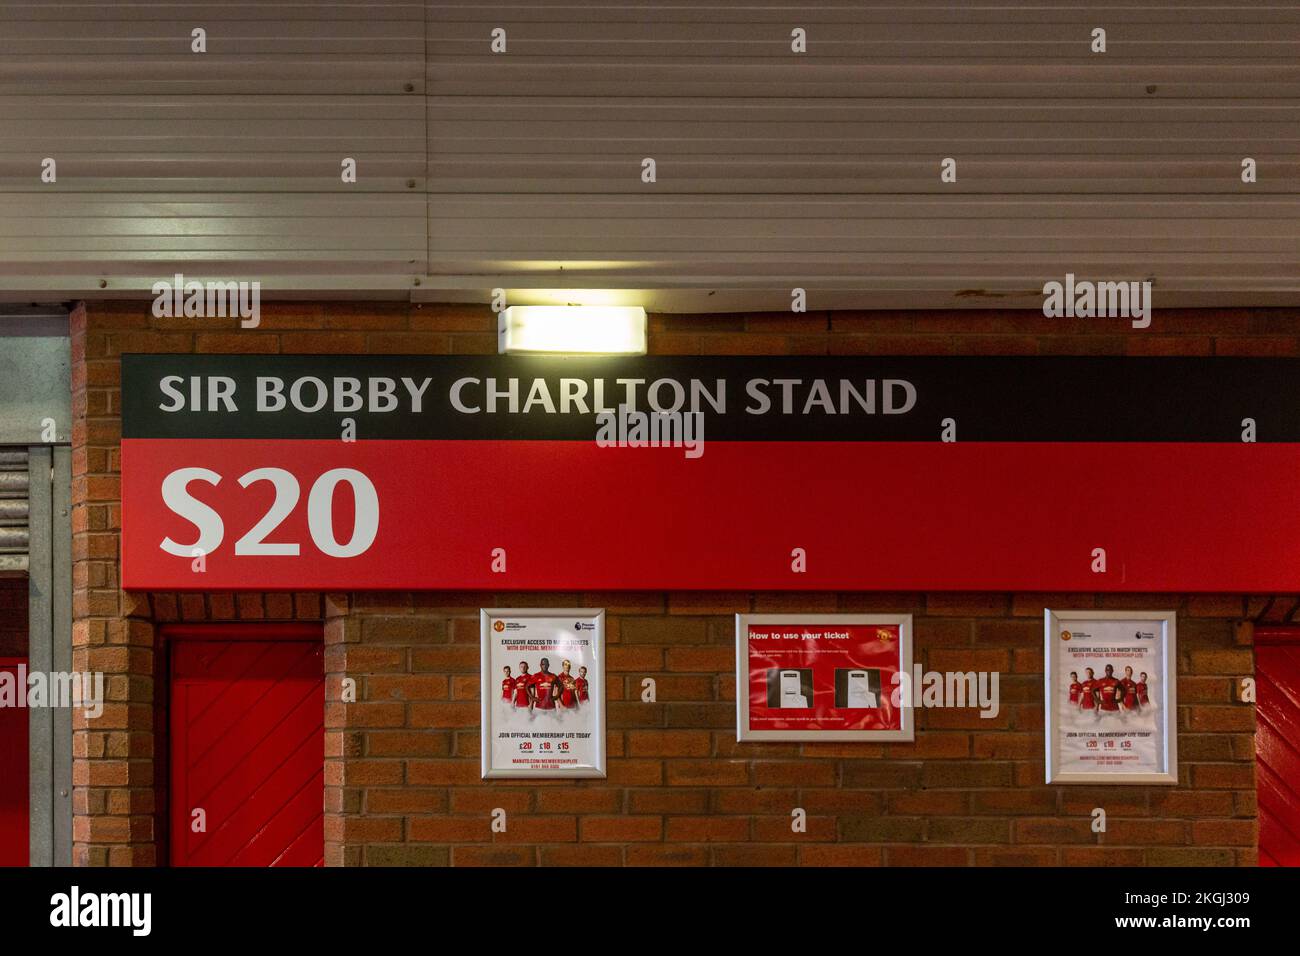 Sir Bobby Charlton Stand at Manchester United's Old Trafford stadium, Manchester Stock Photo